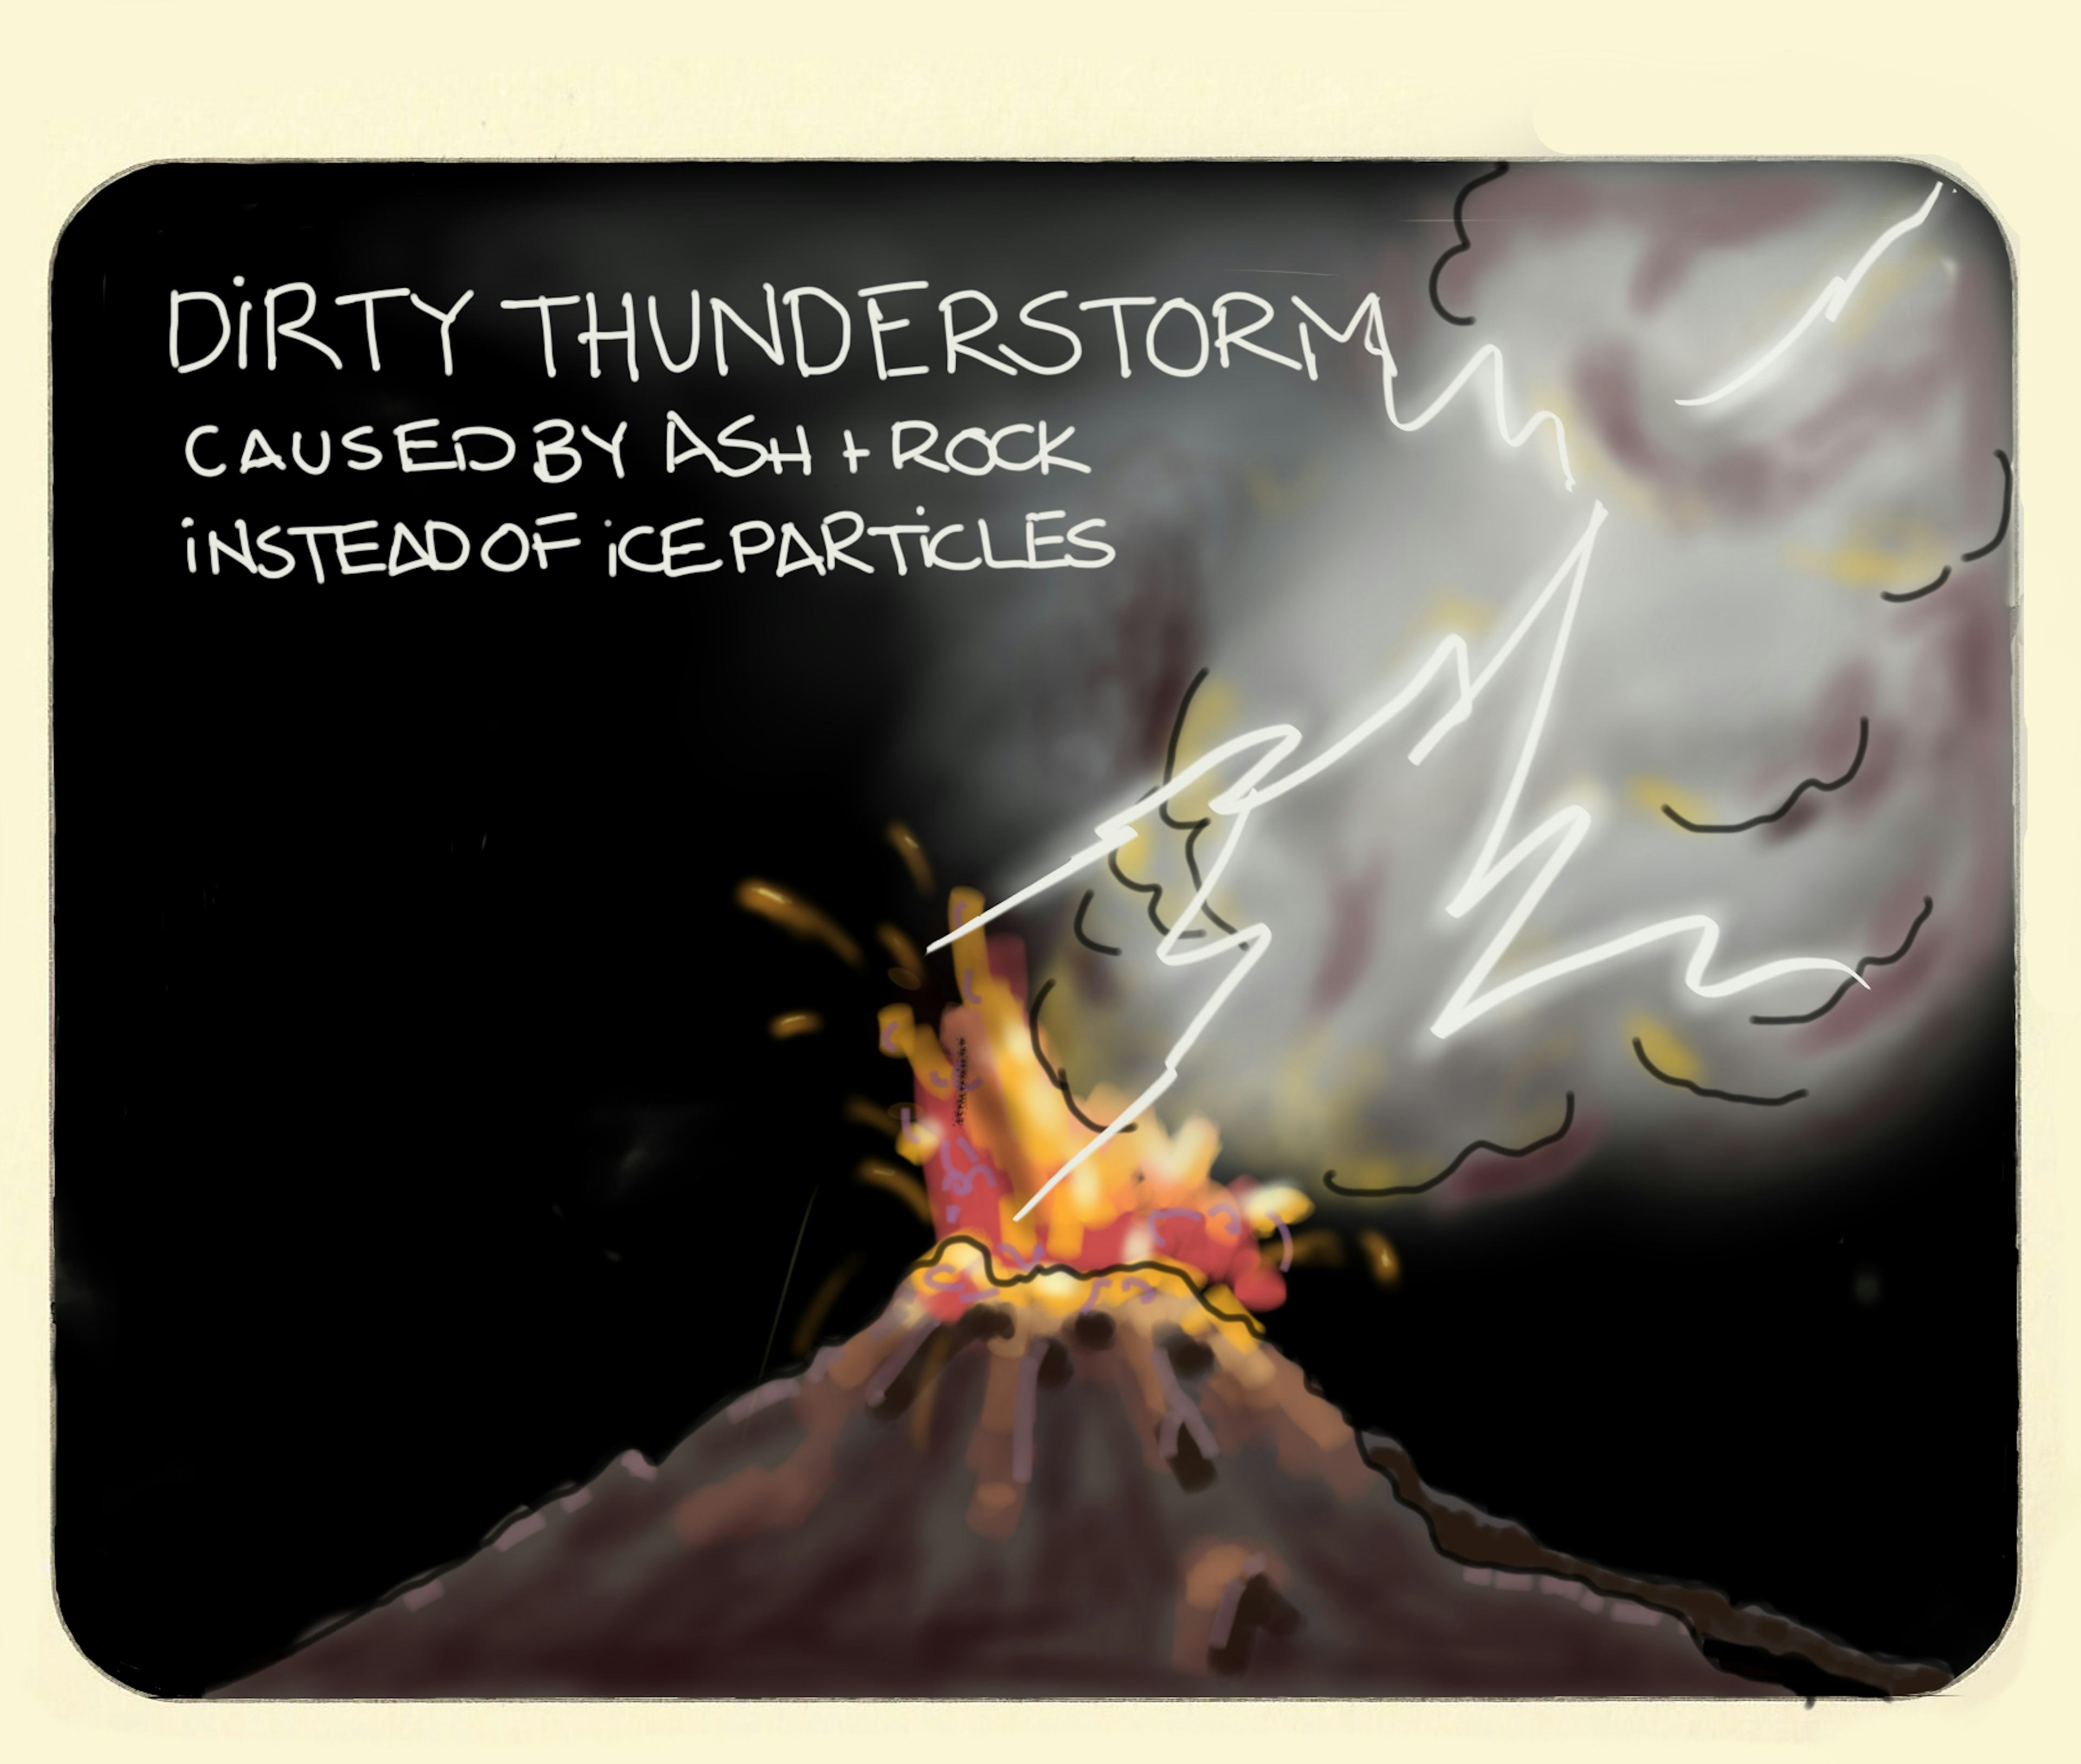 Dirty thunderstorm - Sketchplanations